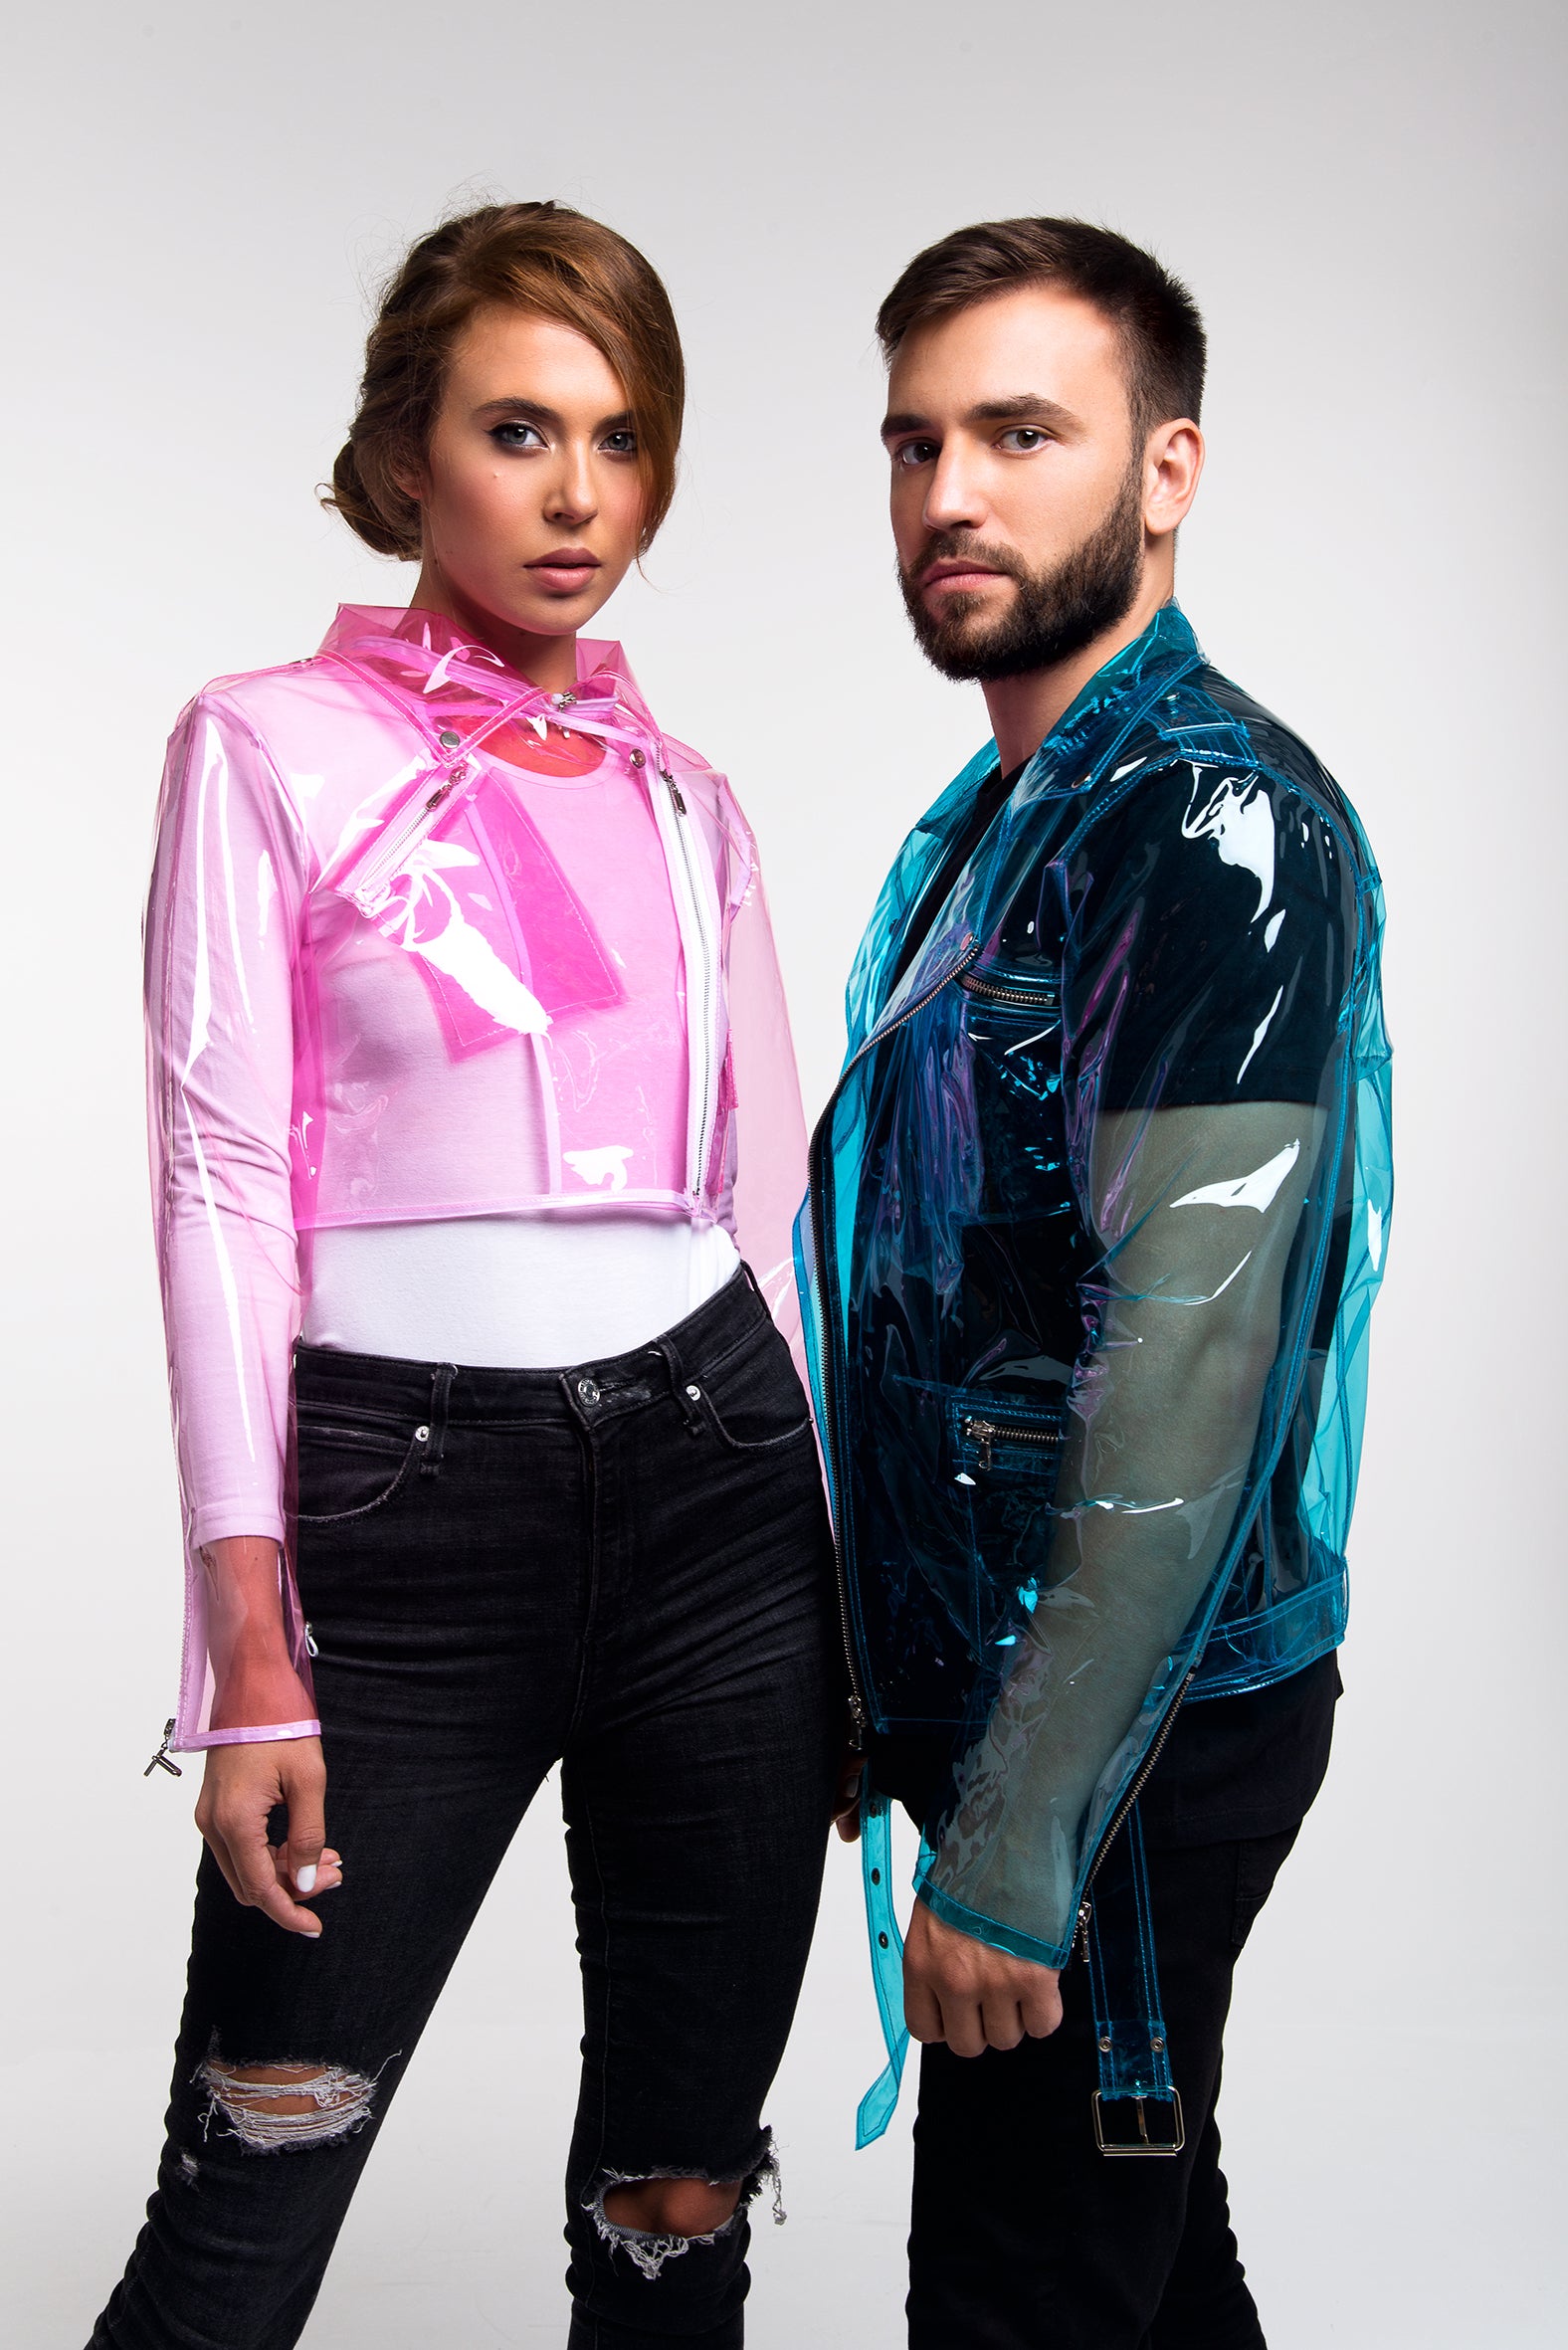 Cropped Transparent Jacket. Stylish Rain Jacket ! Hoodie style! Wind resistant clothing. Unique and bright design.